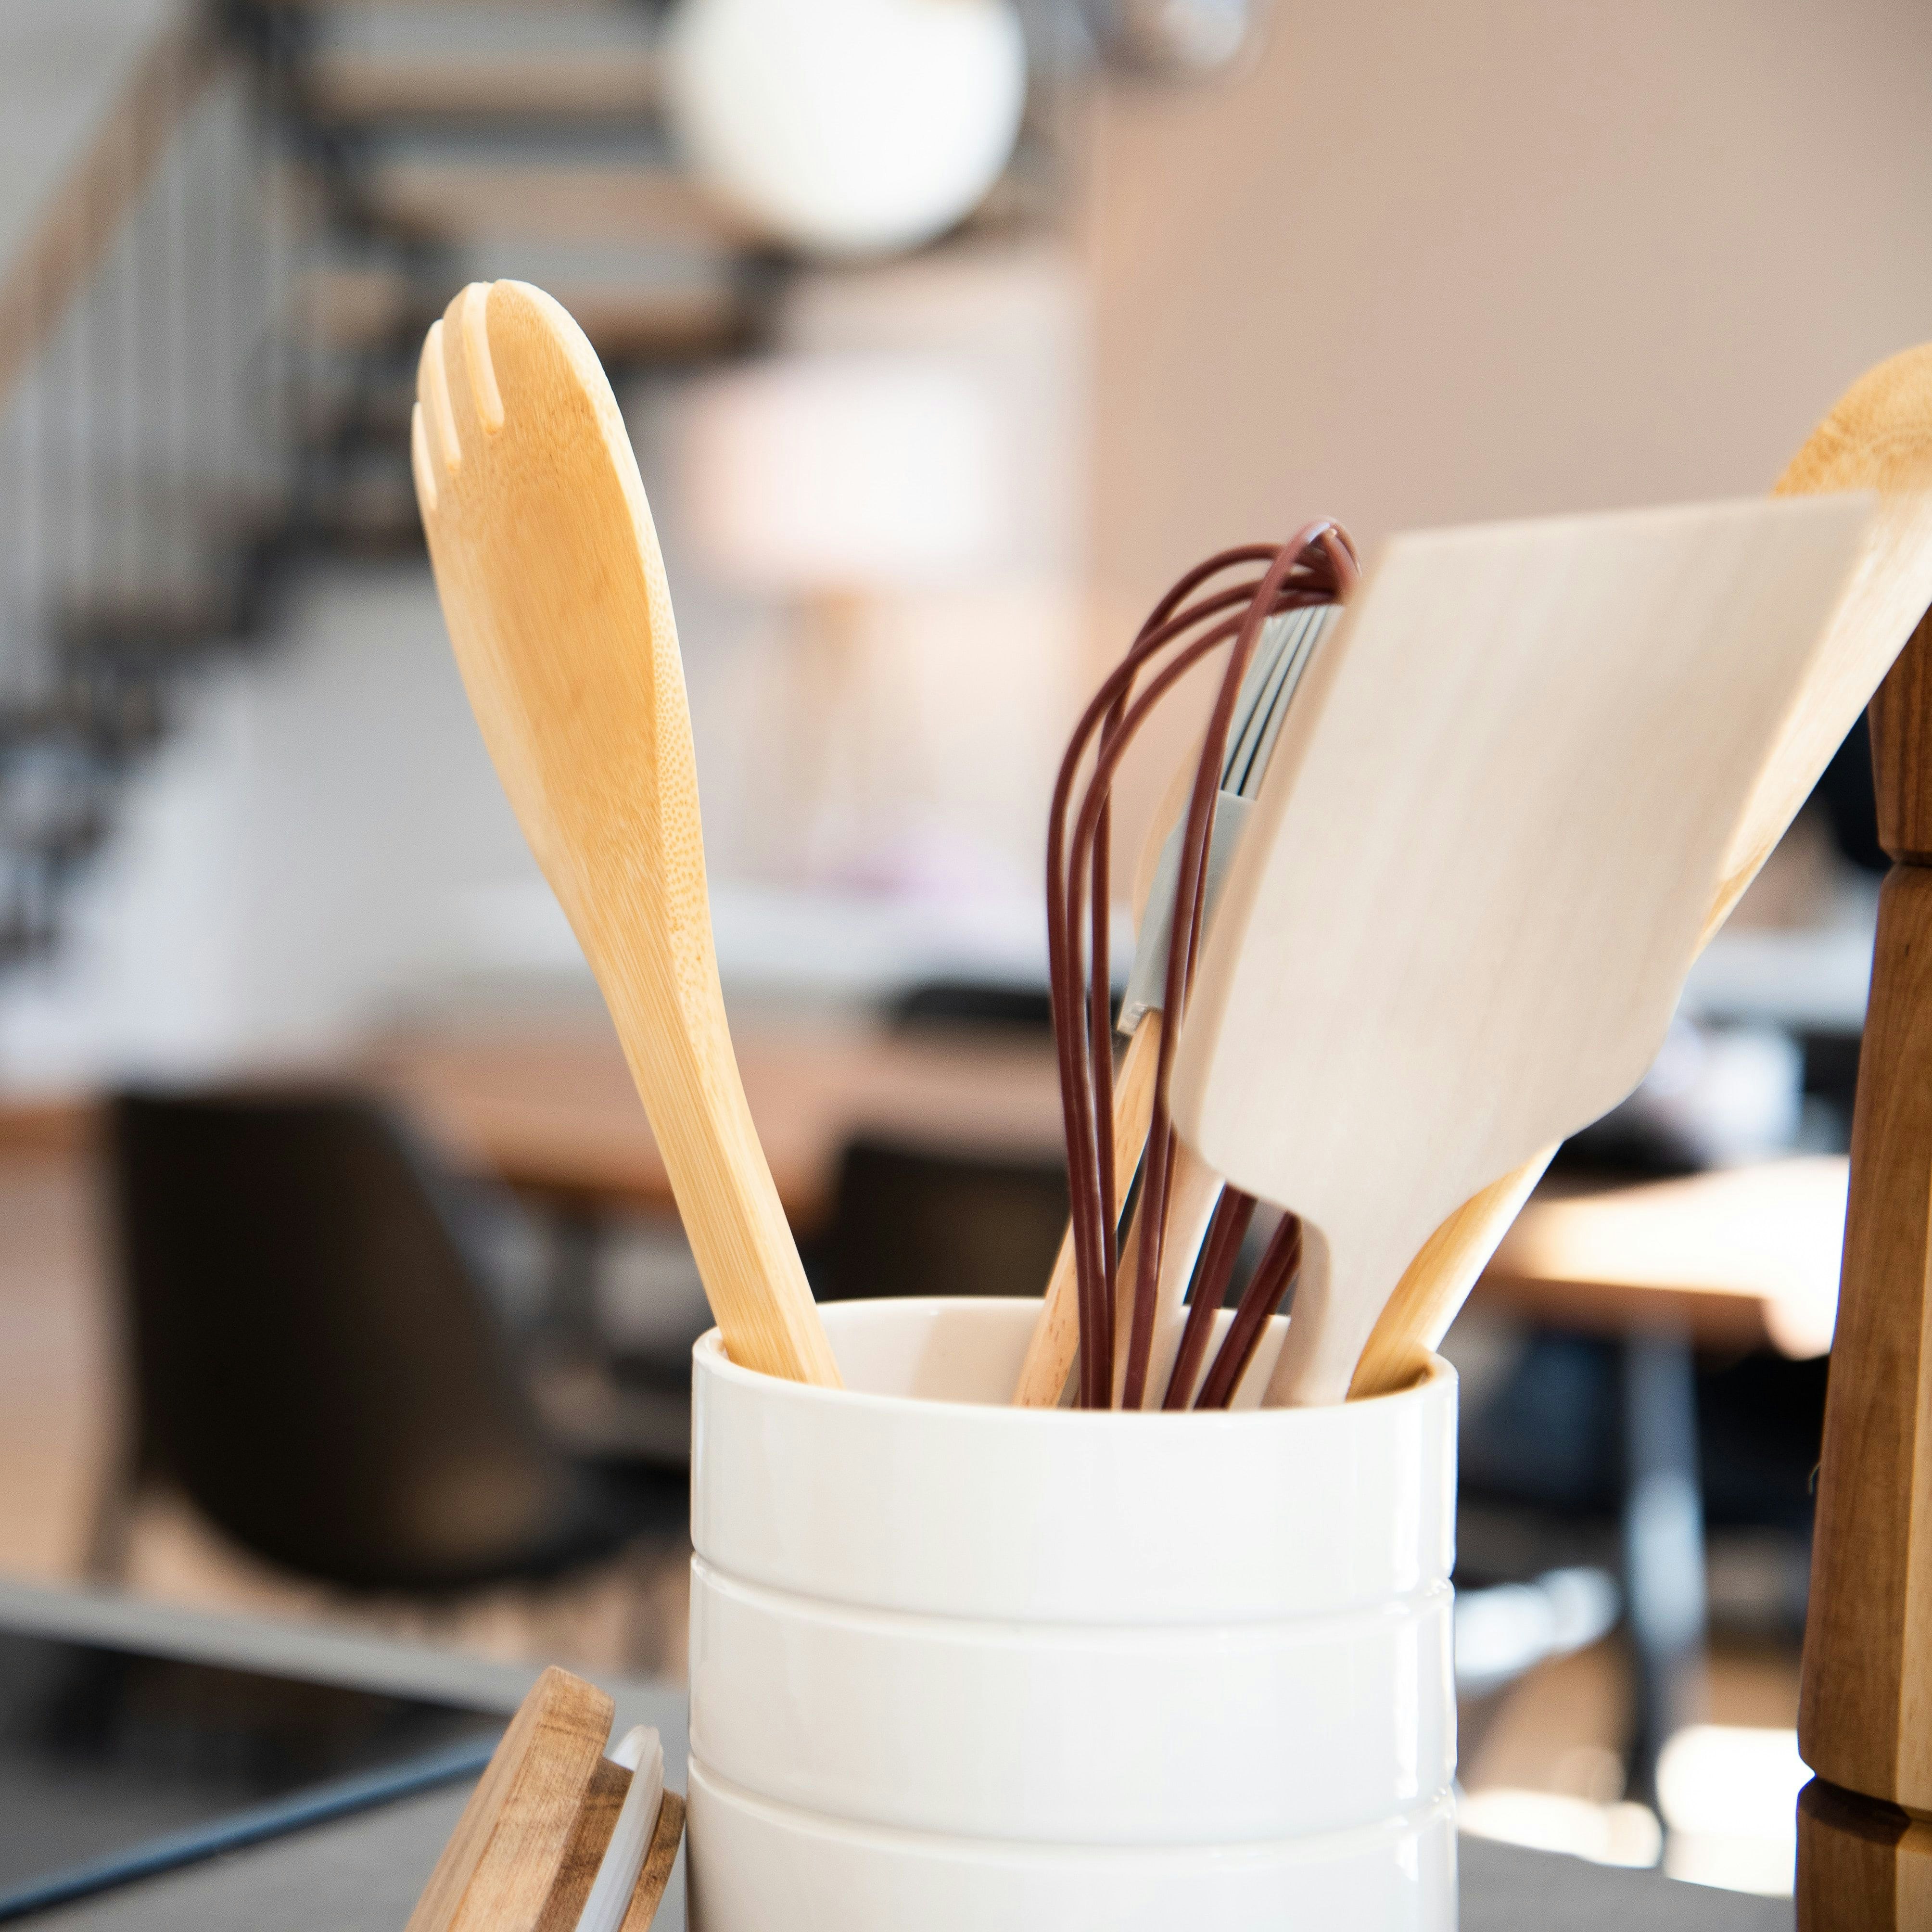 stand with kitchen utensils including wooden spoons 